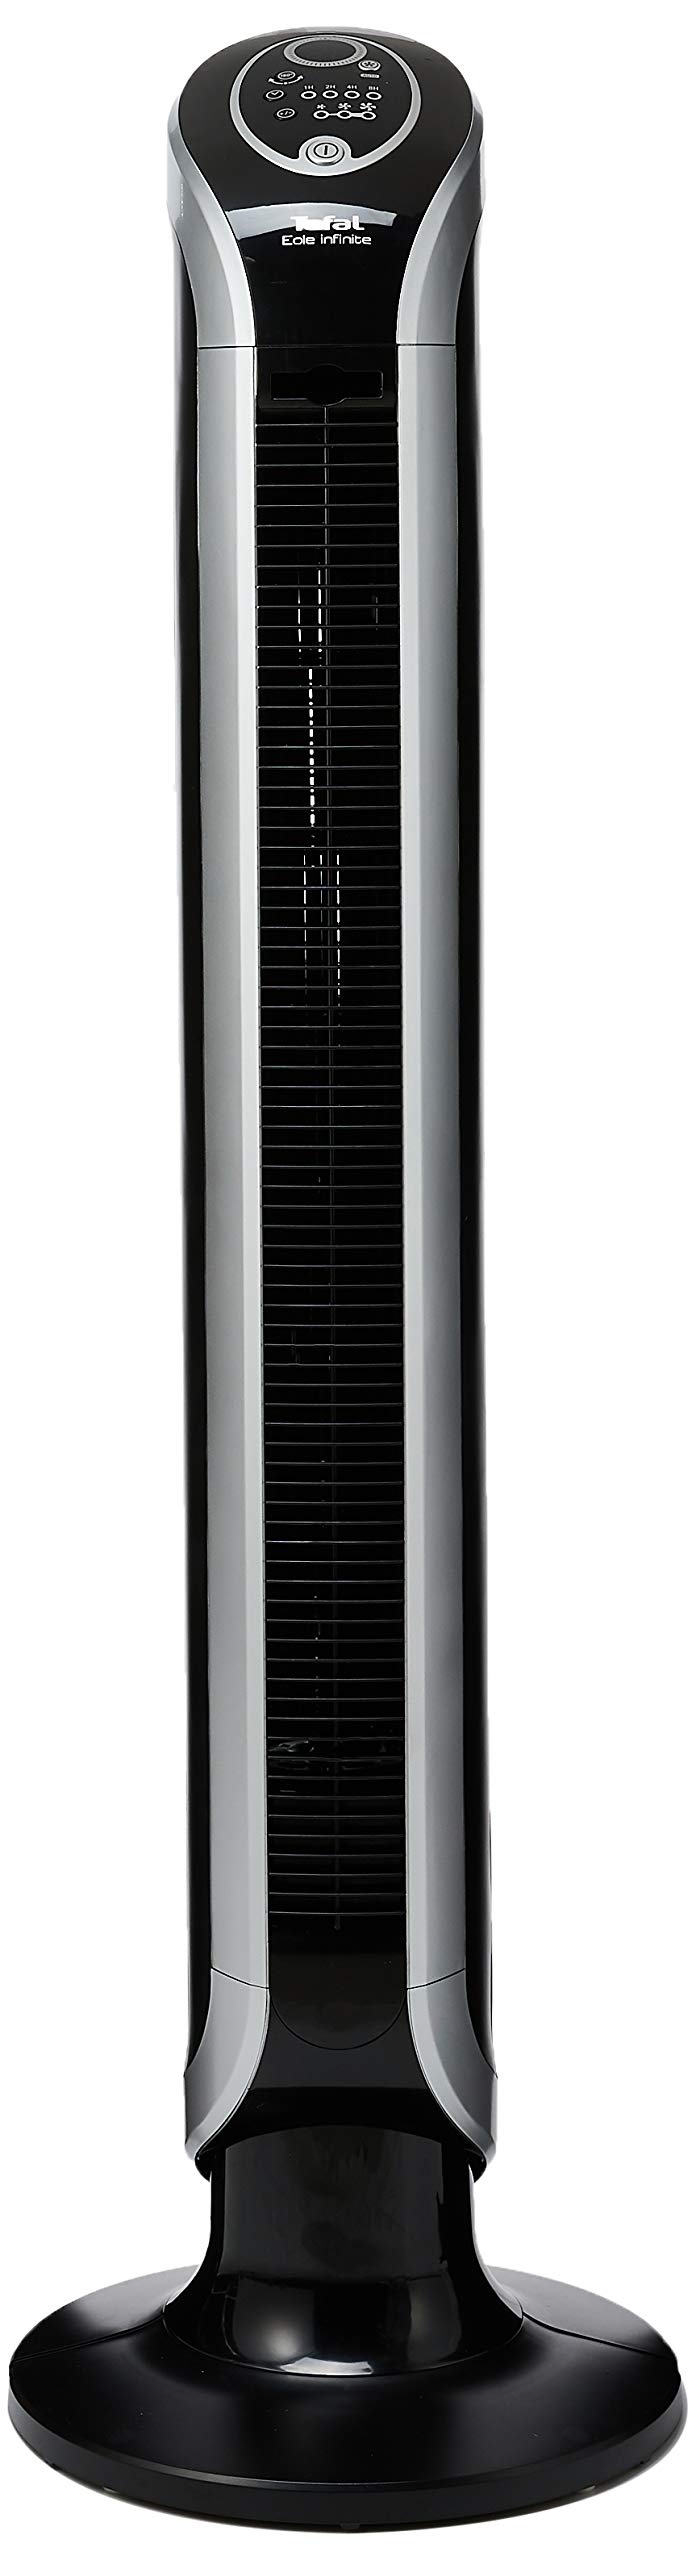 Tefal VF6670 Eole Infinite Tower Fan with Remote